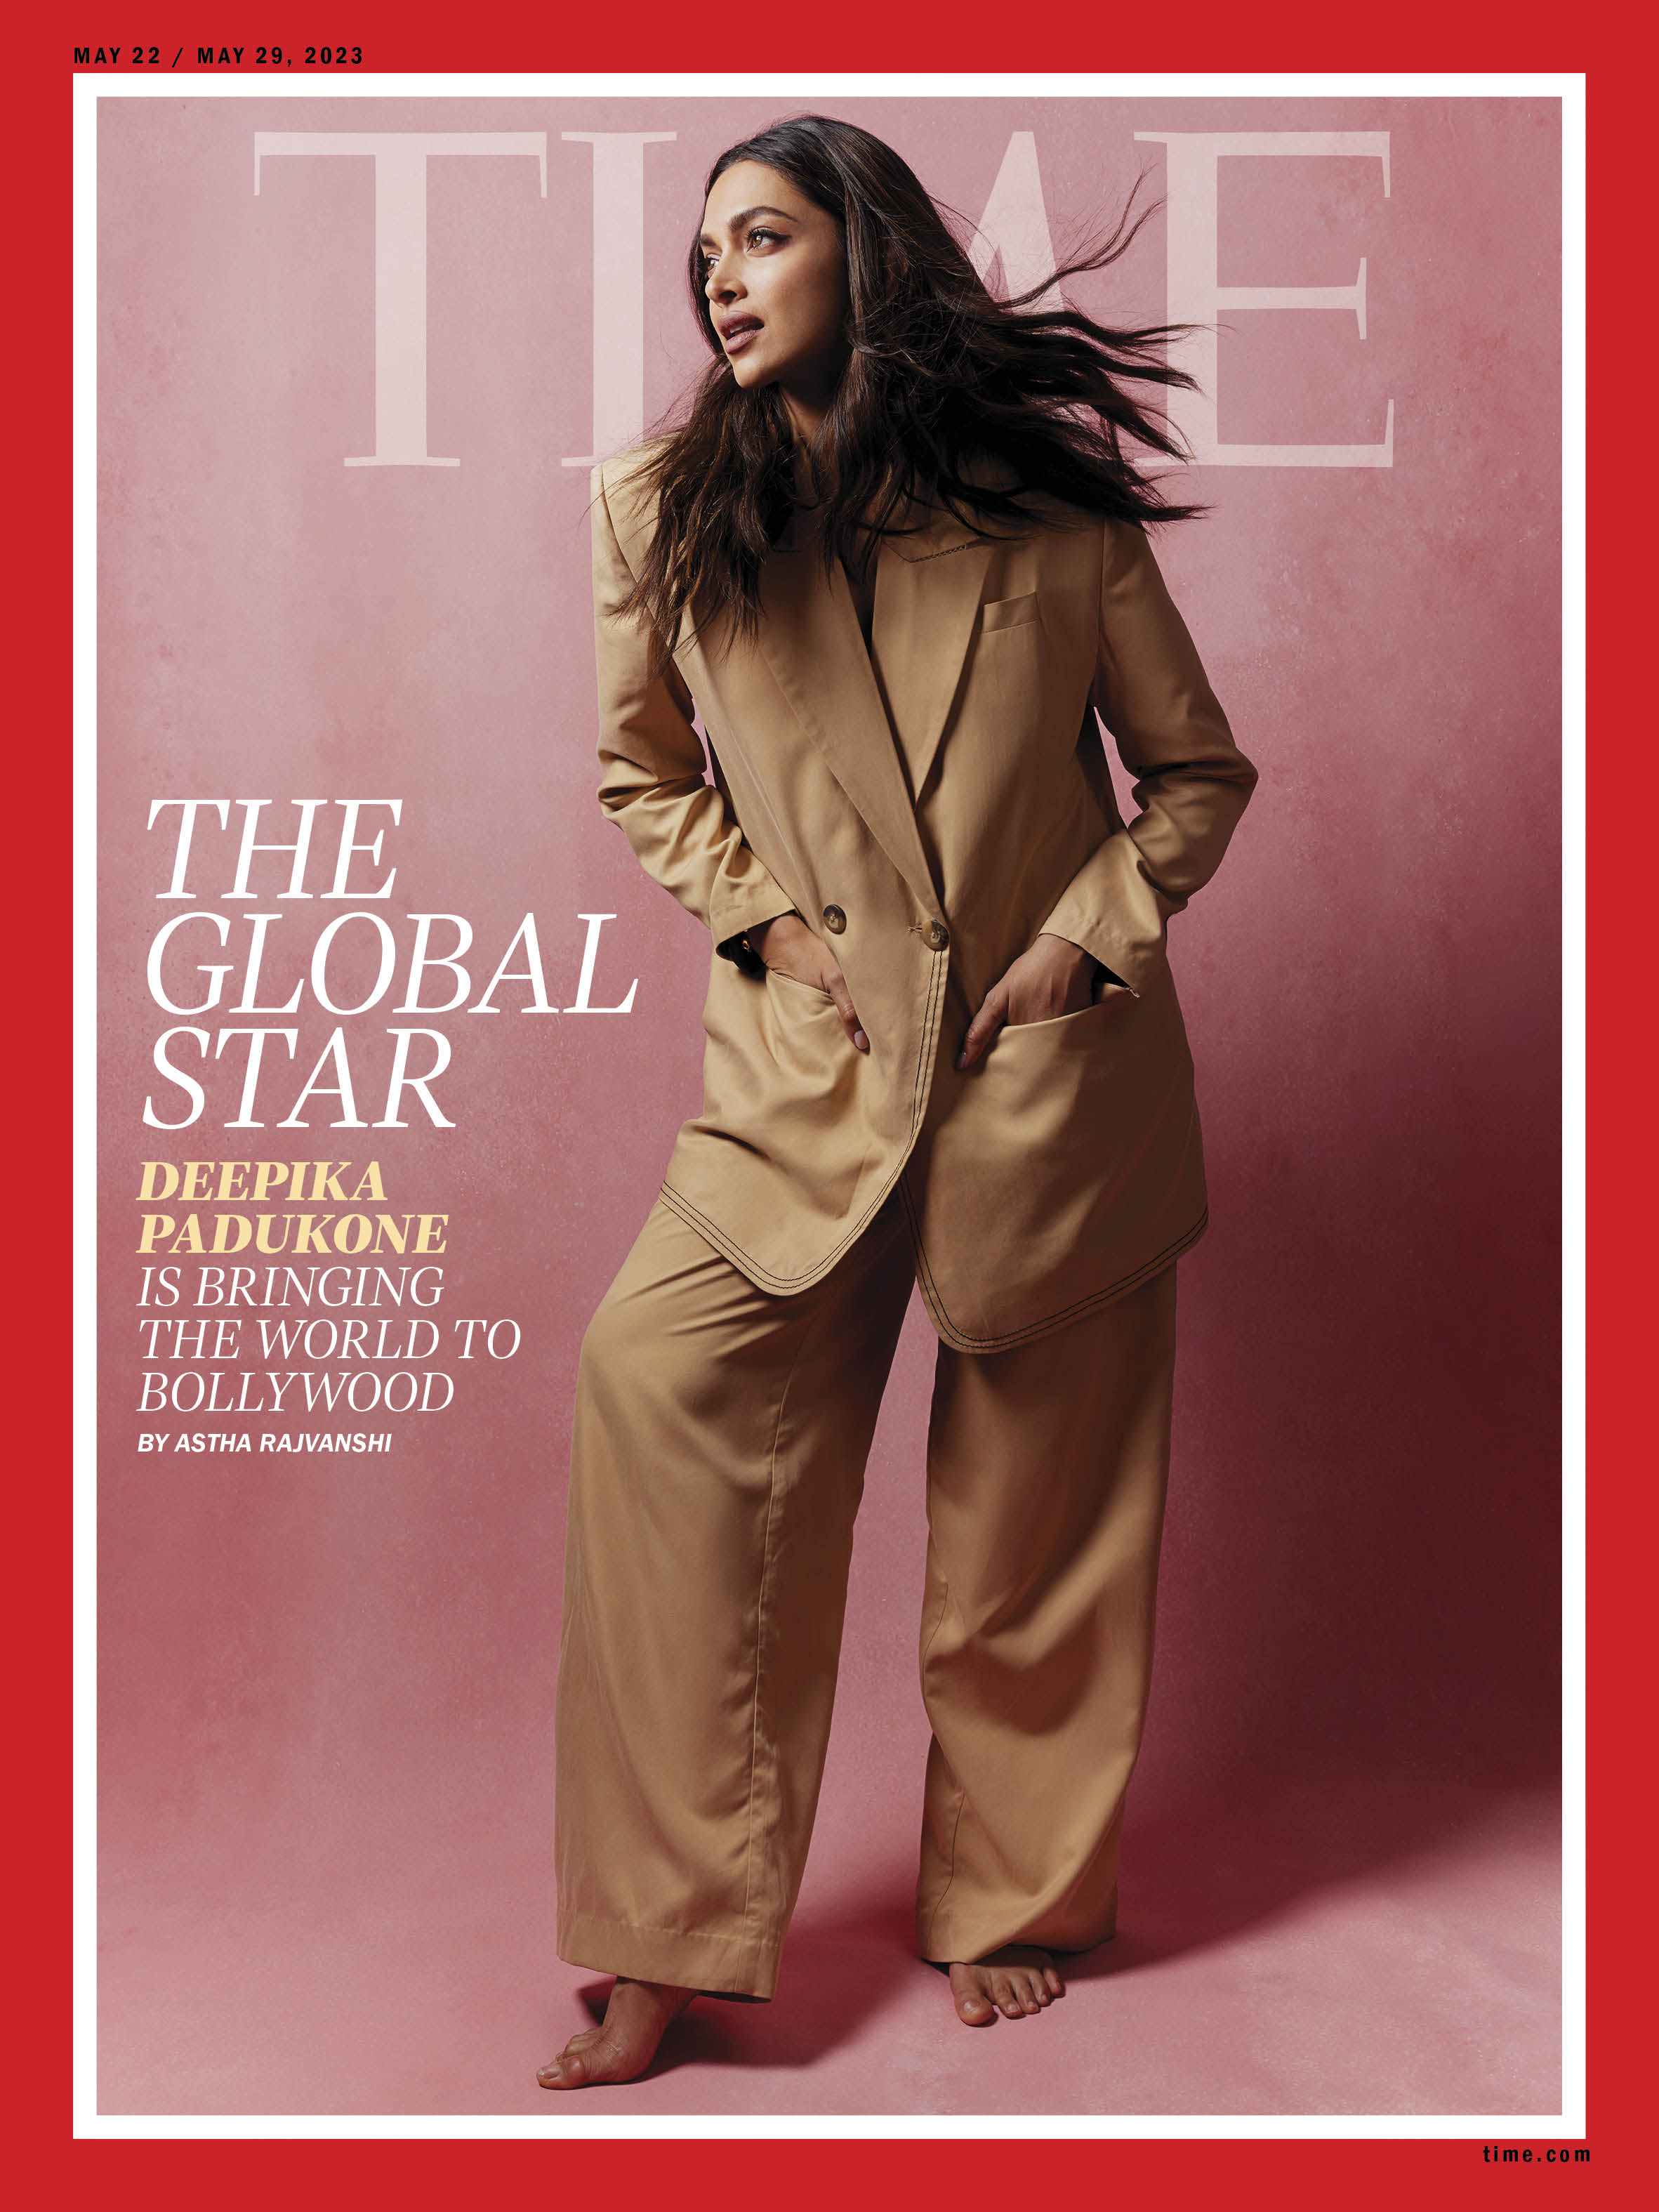 Xxx16video - Deepika Padukone on Bollywood and Becoming a Global Star | Time